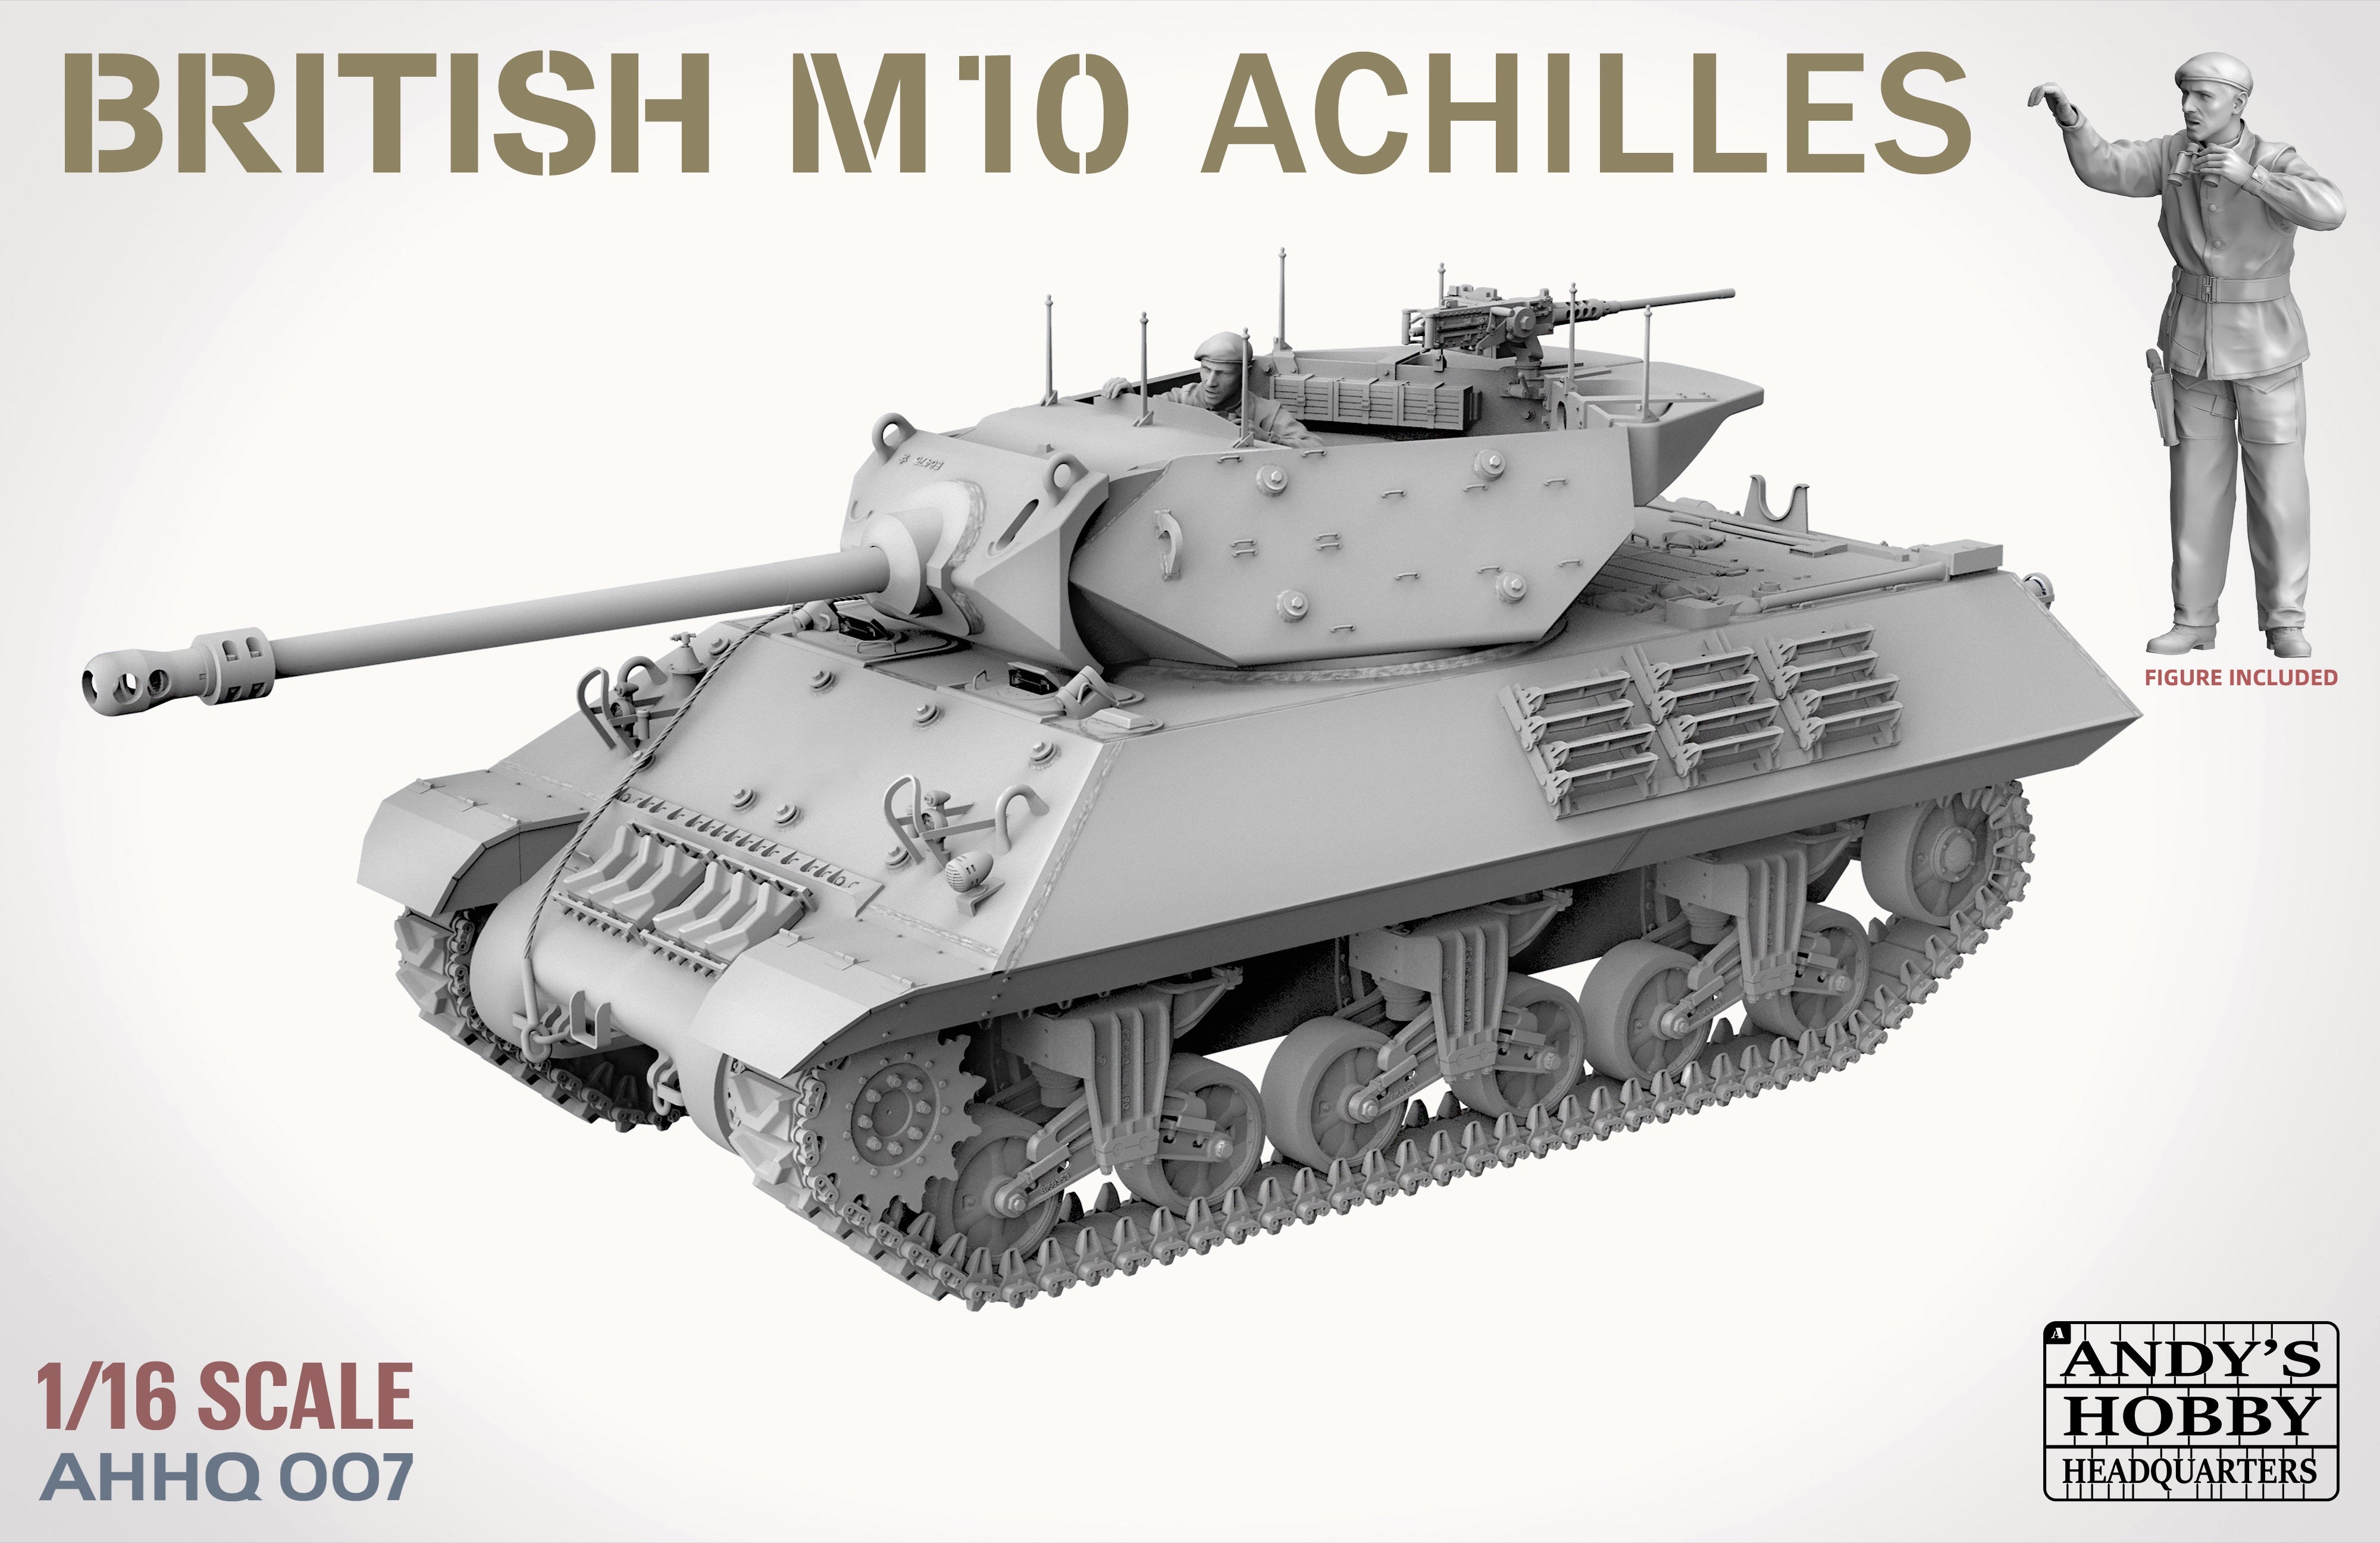 British Achilles M10 IIc Tank Destroyer (with Full Body Figure) 1/16 by Takom